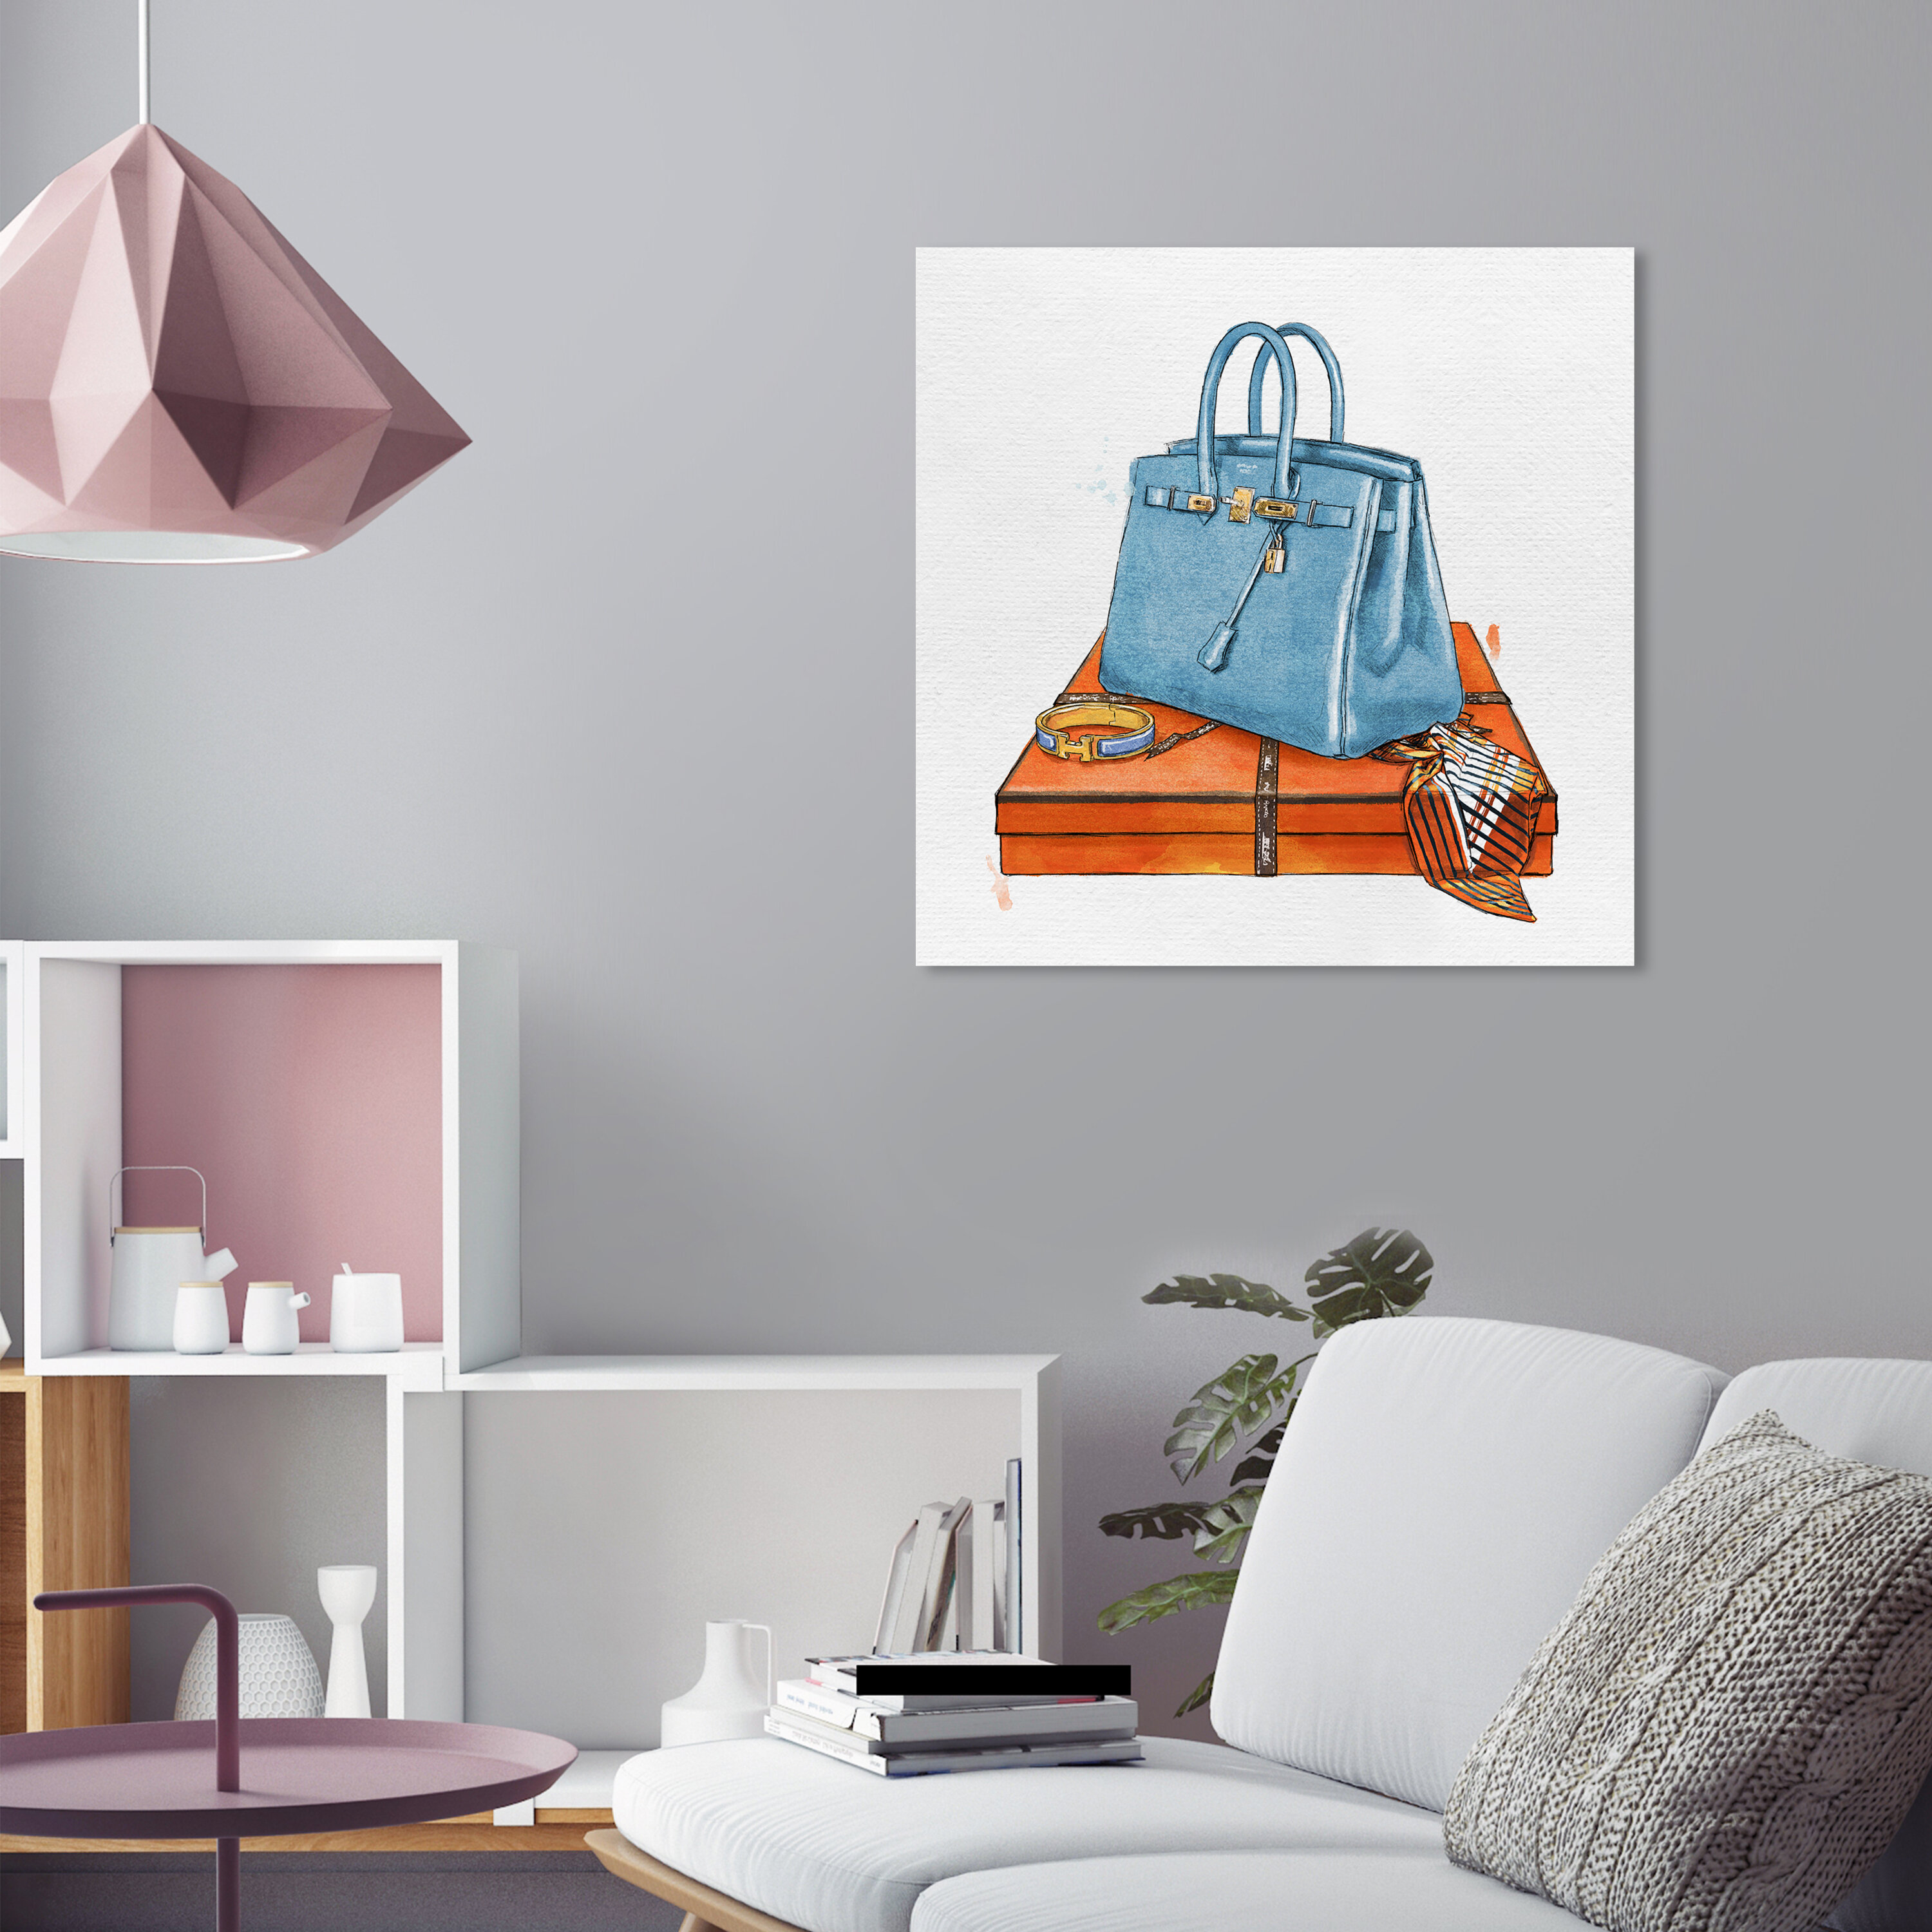 Oliver Gal 'My Bag Collection III' Fashion and Glam Wall Art Canvas Print - Blue, Orange - 24 x 24